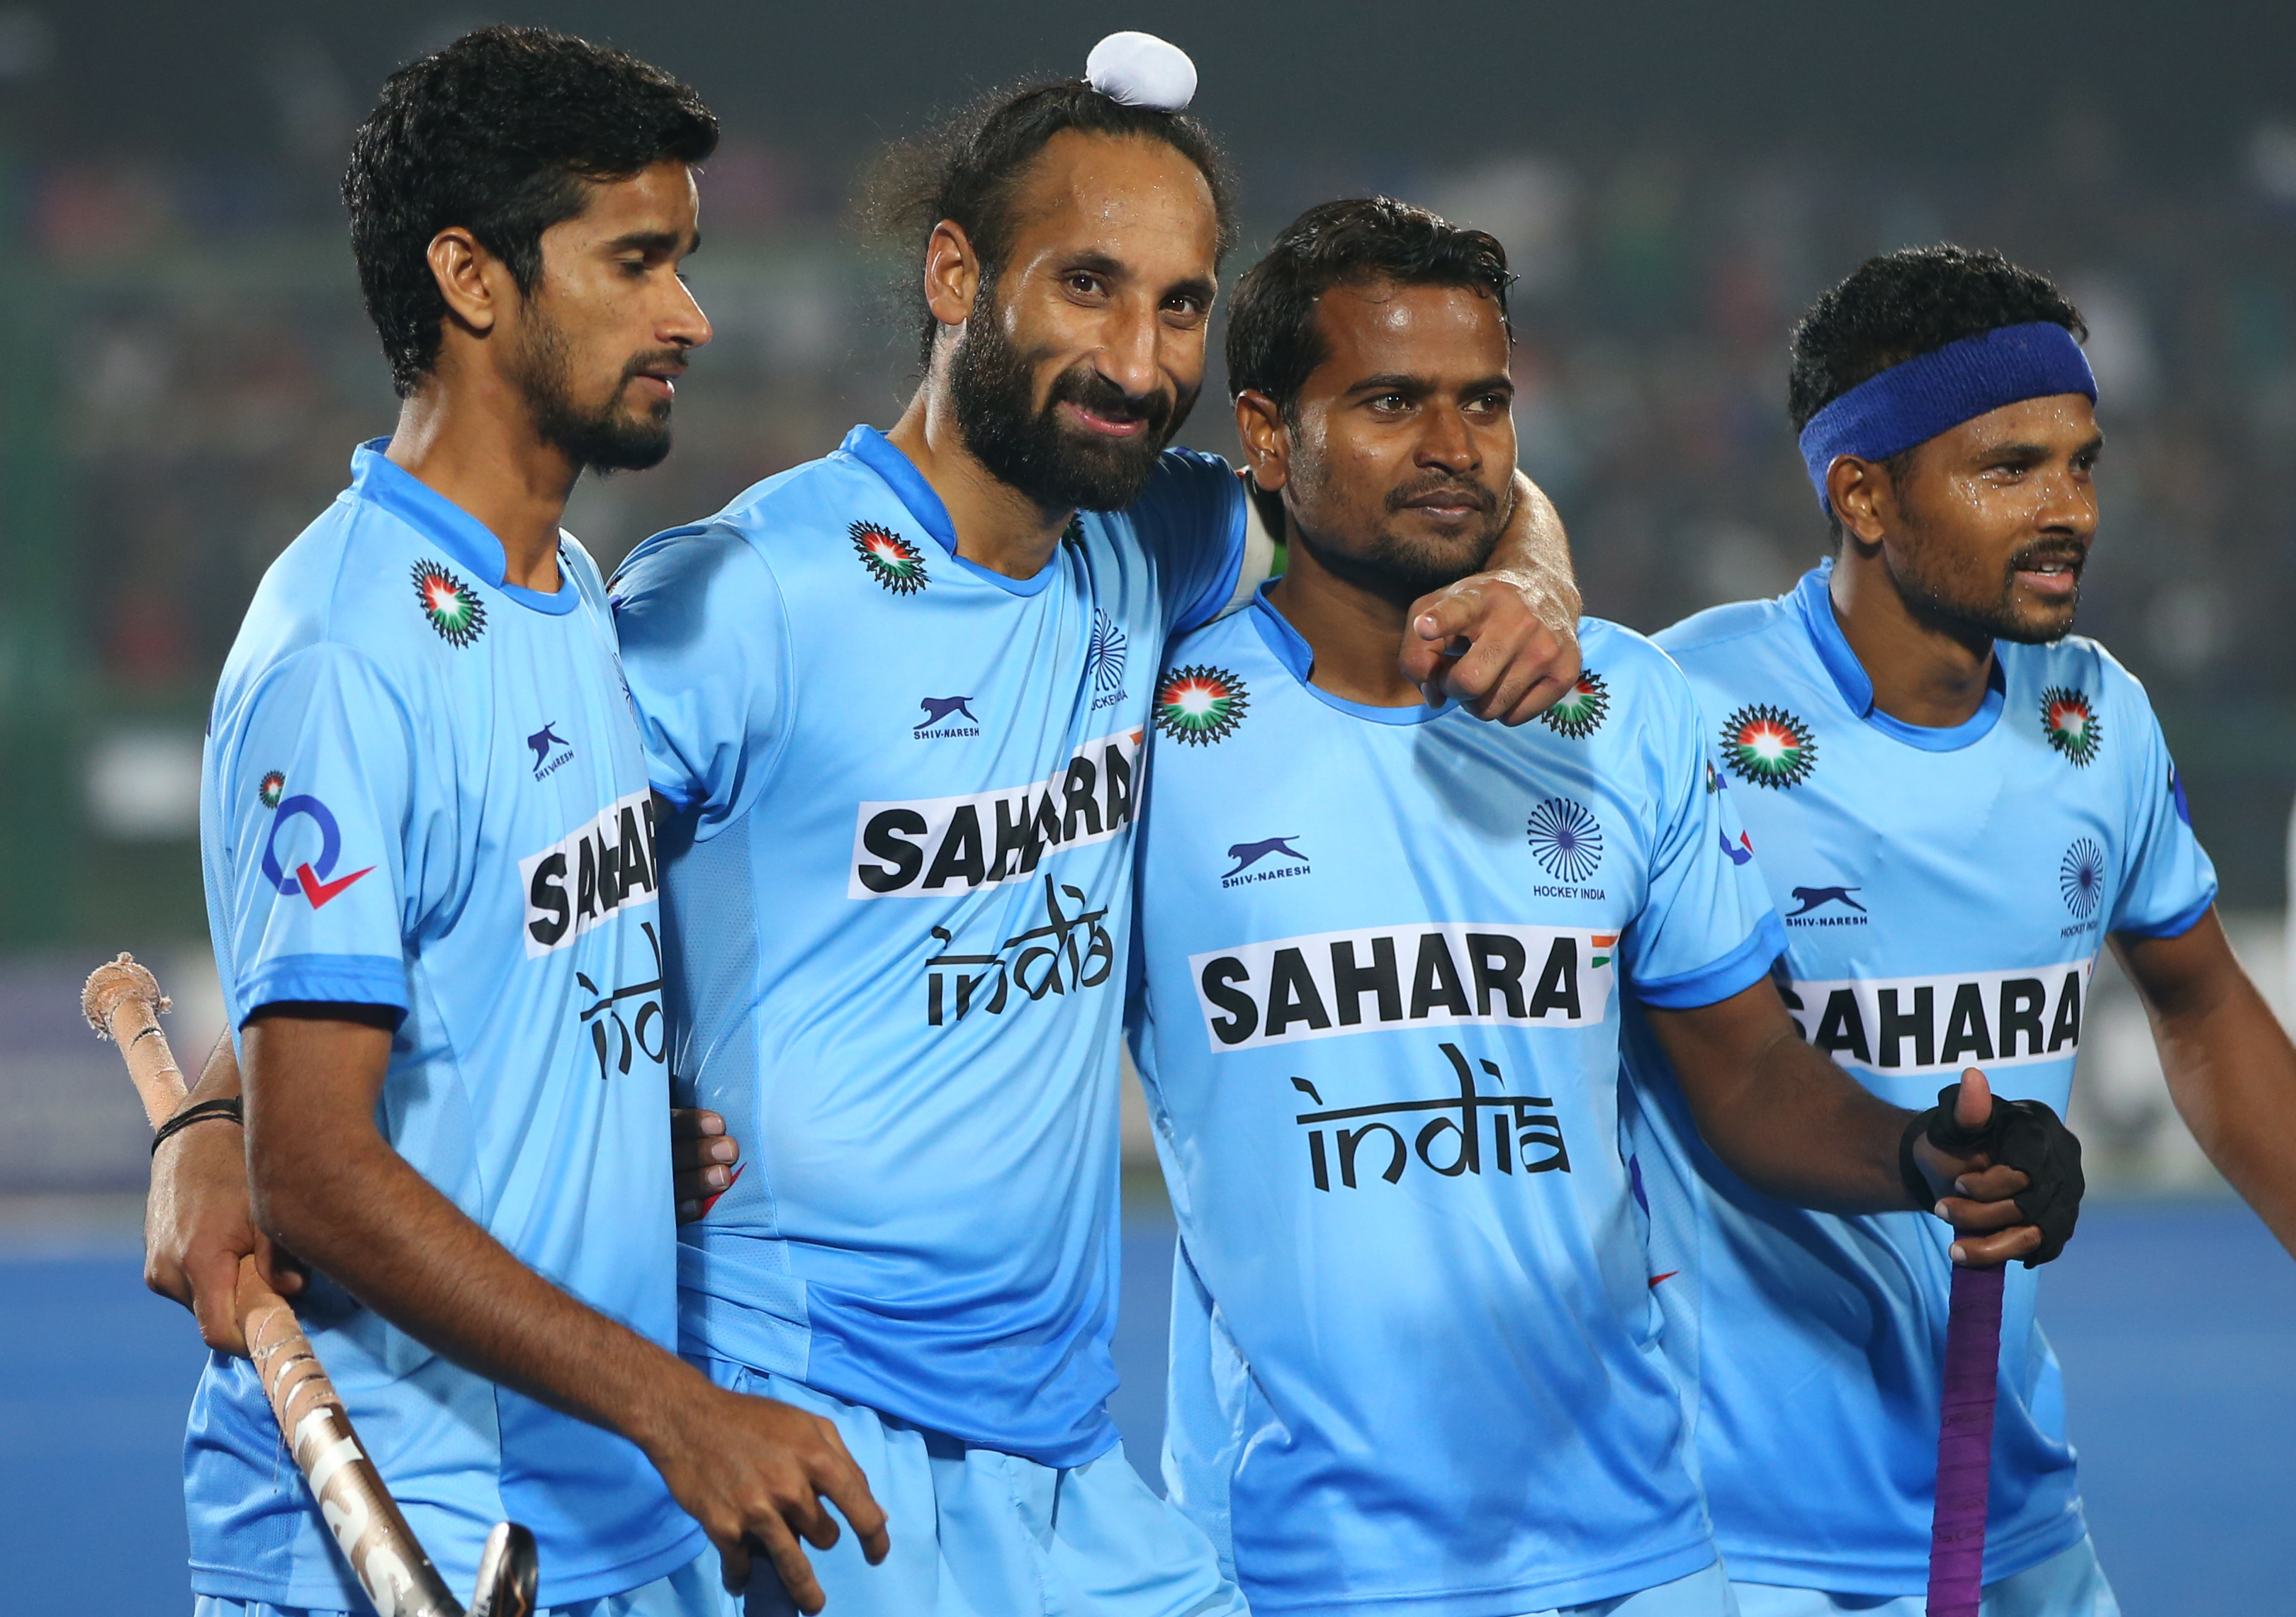 India move down to sixth in latest hockey rankings